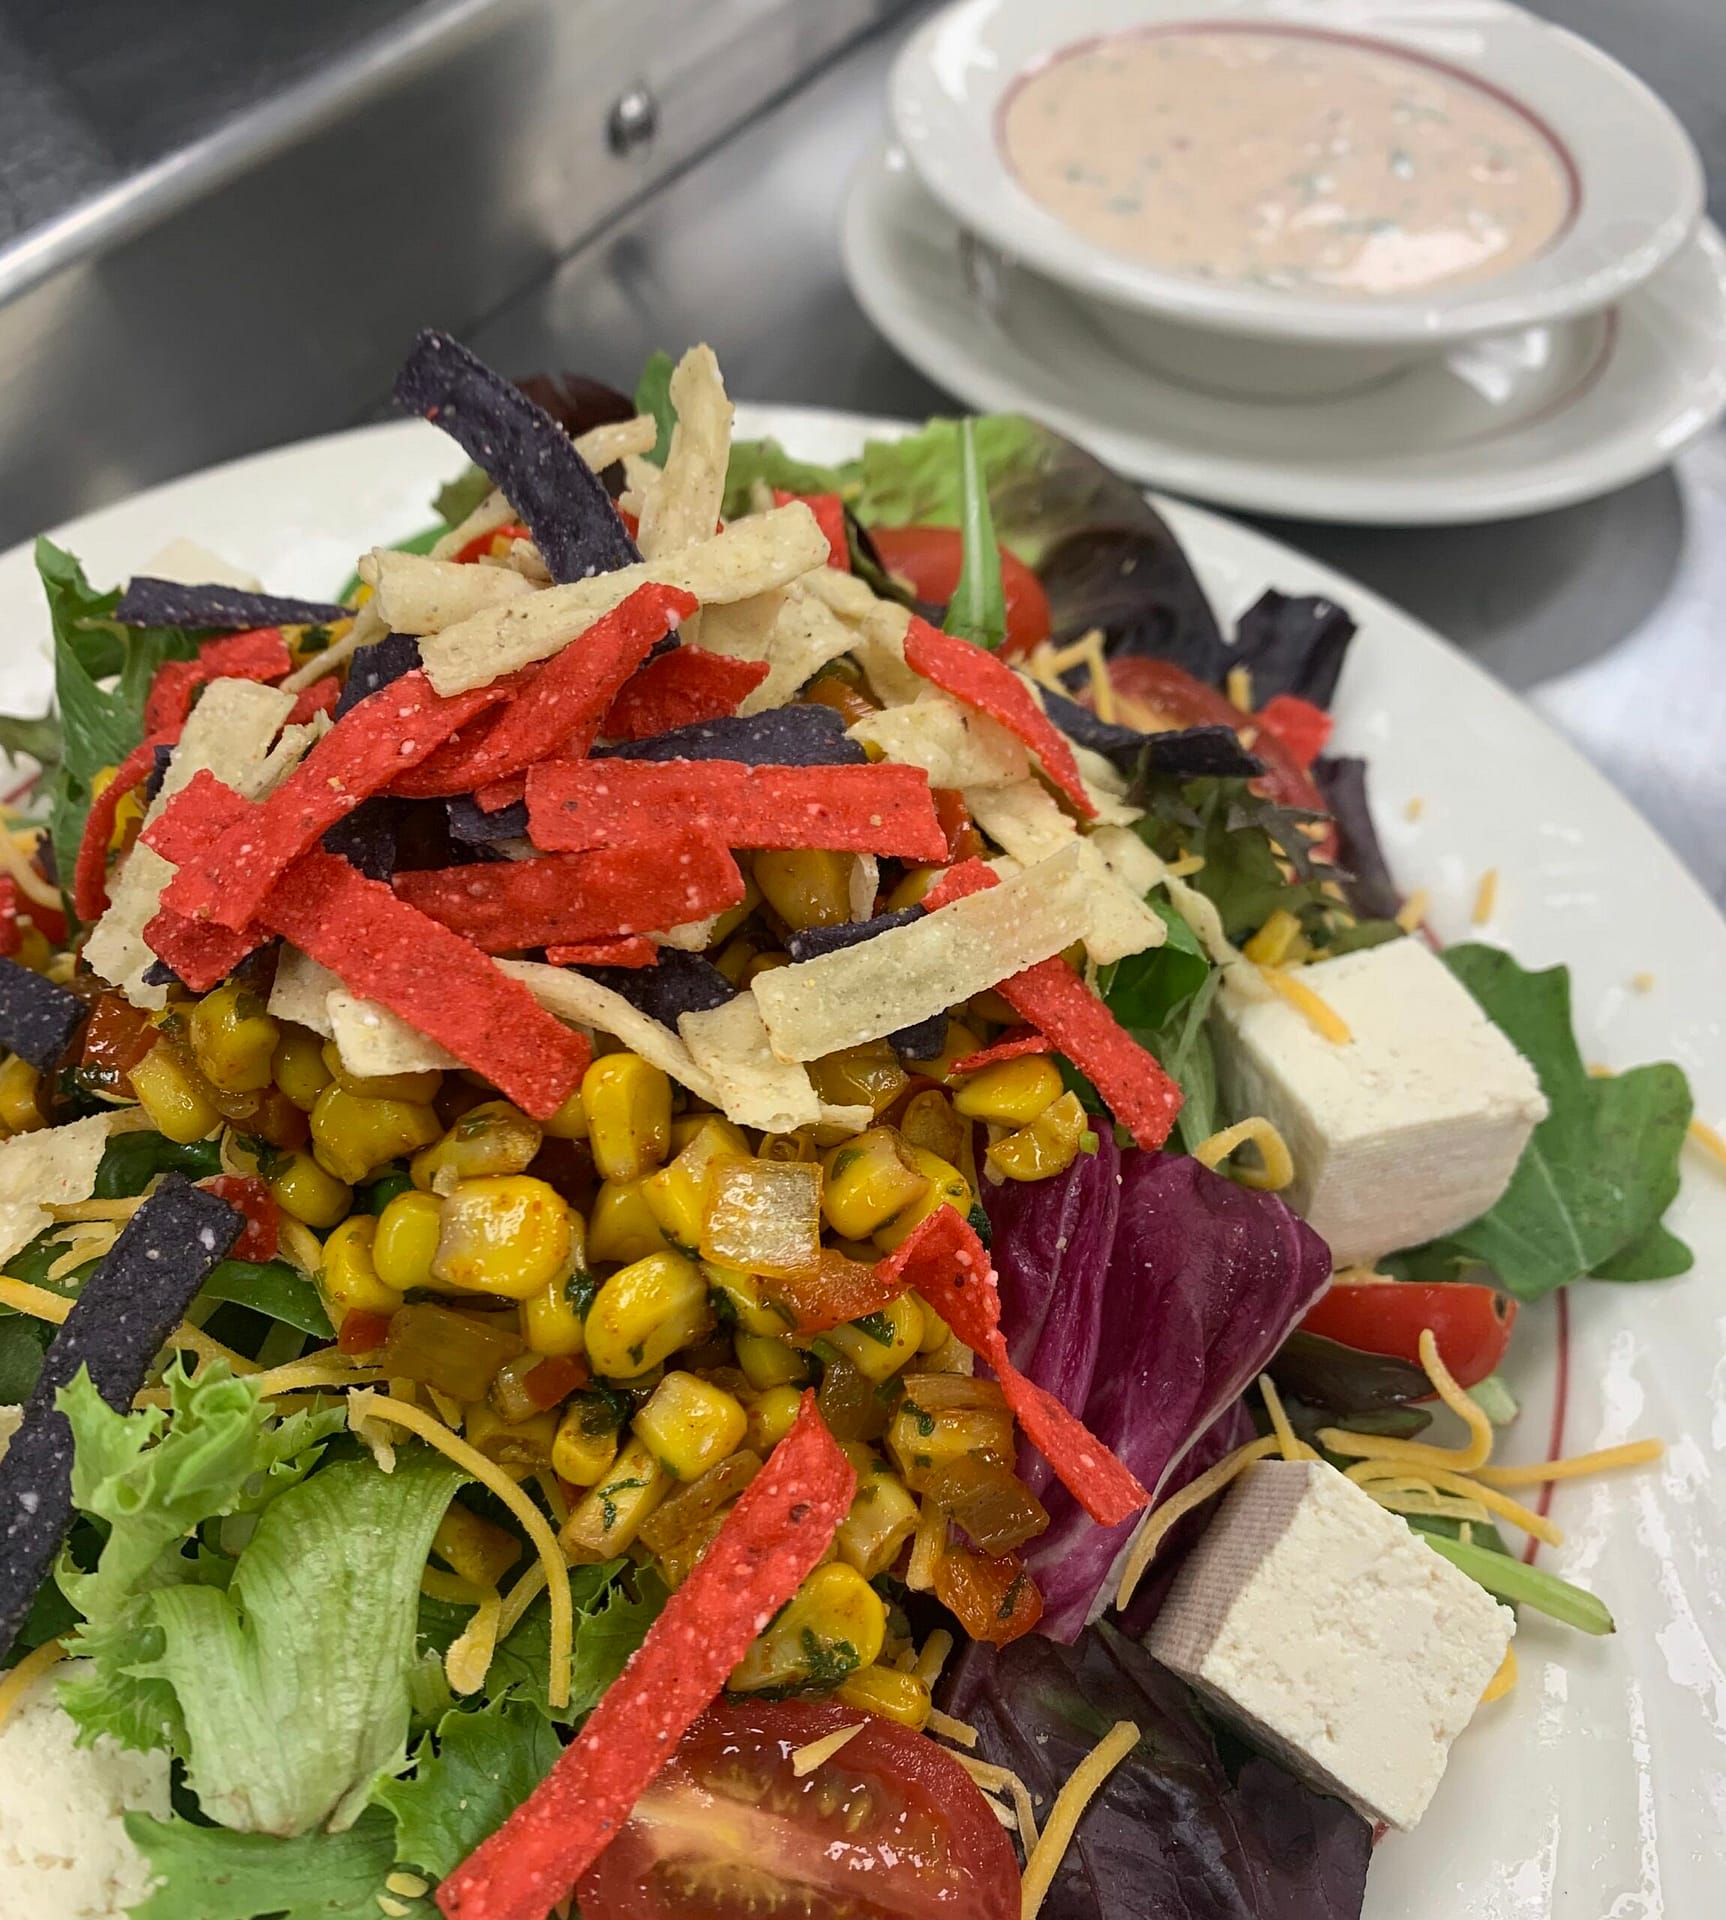 Salad with lettuce, corn, tortilla strips, and other vegetables at senior living community